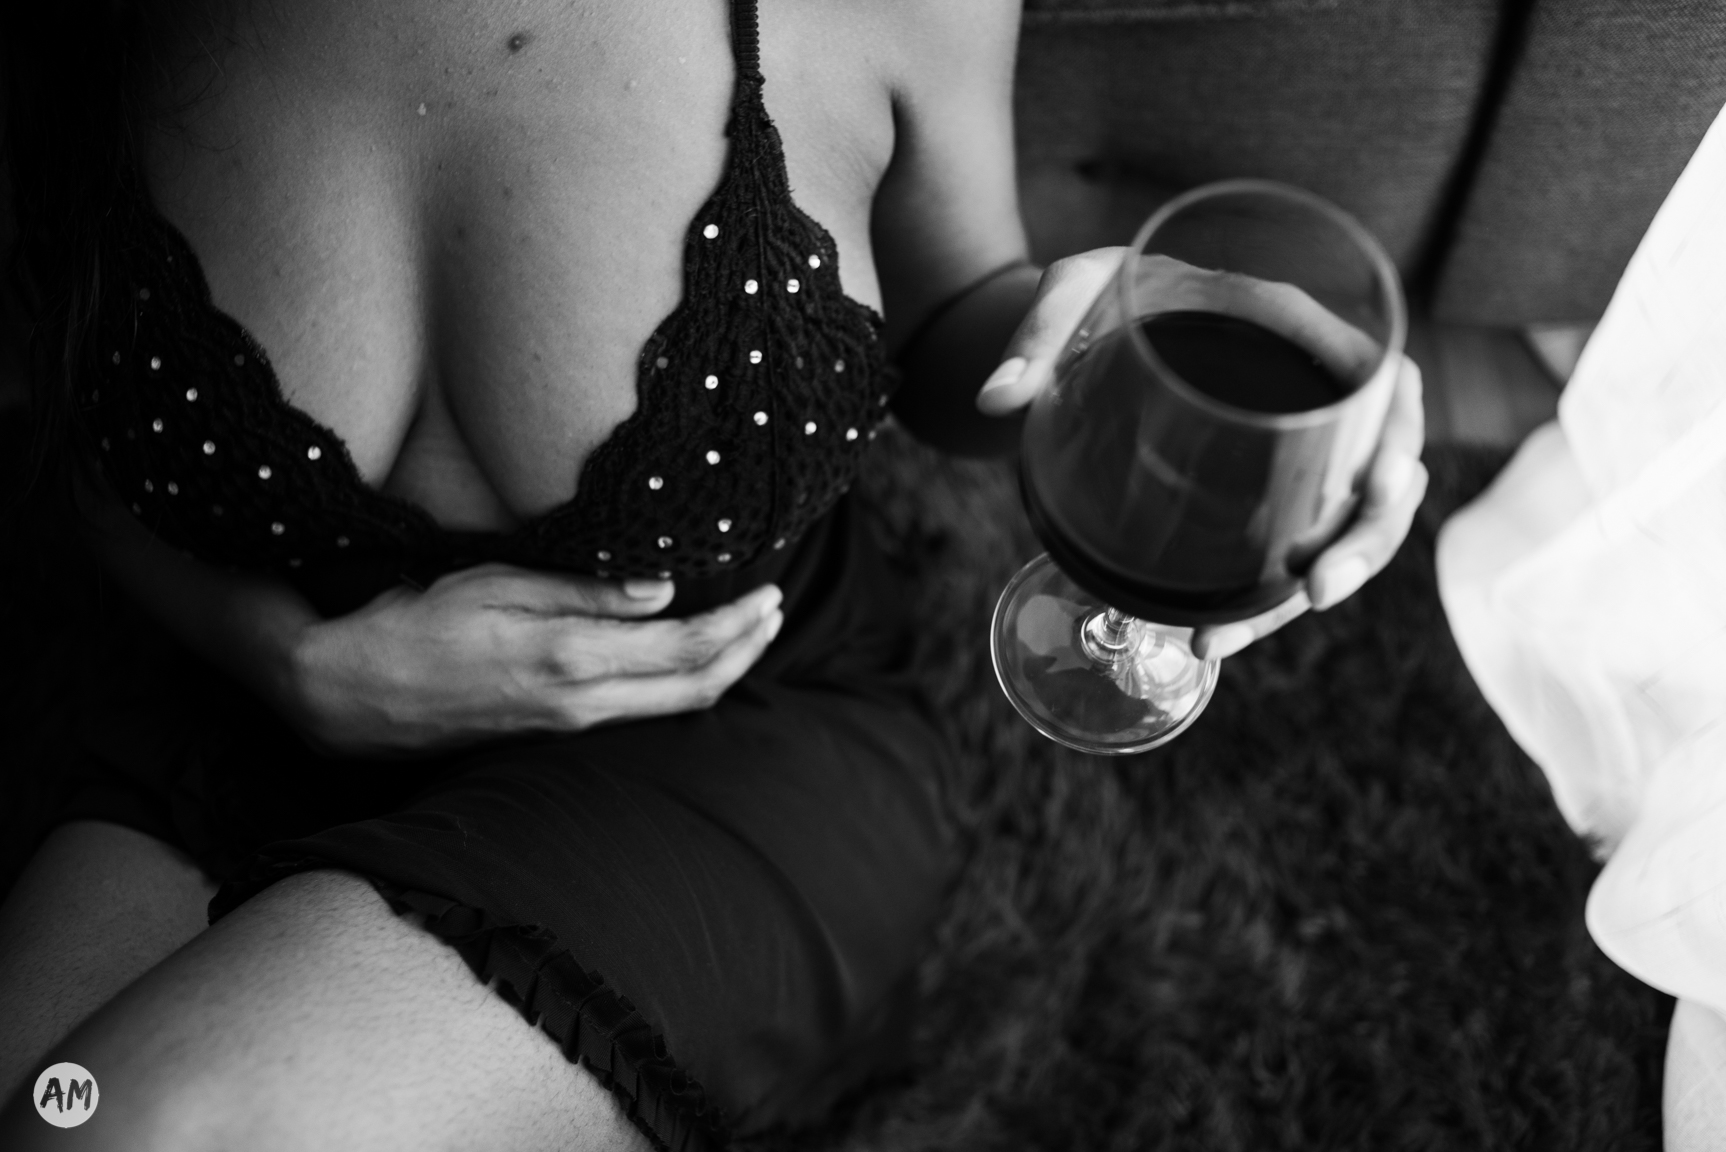 A black and white photo of a woman in lingerie holding a glass of wine